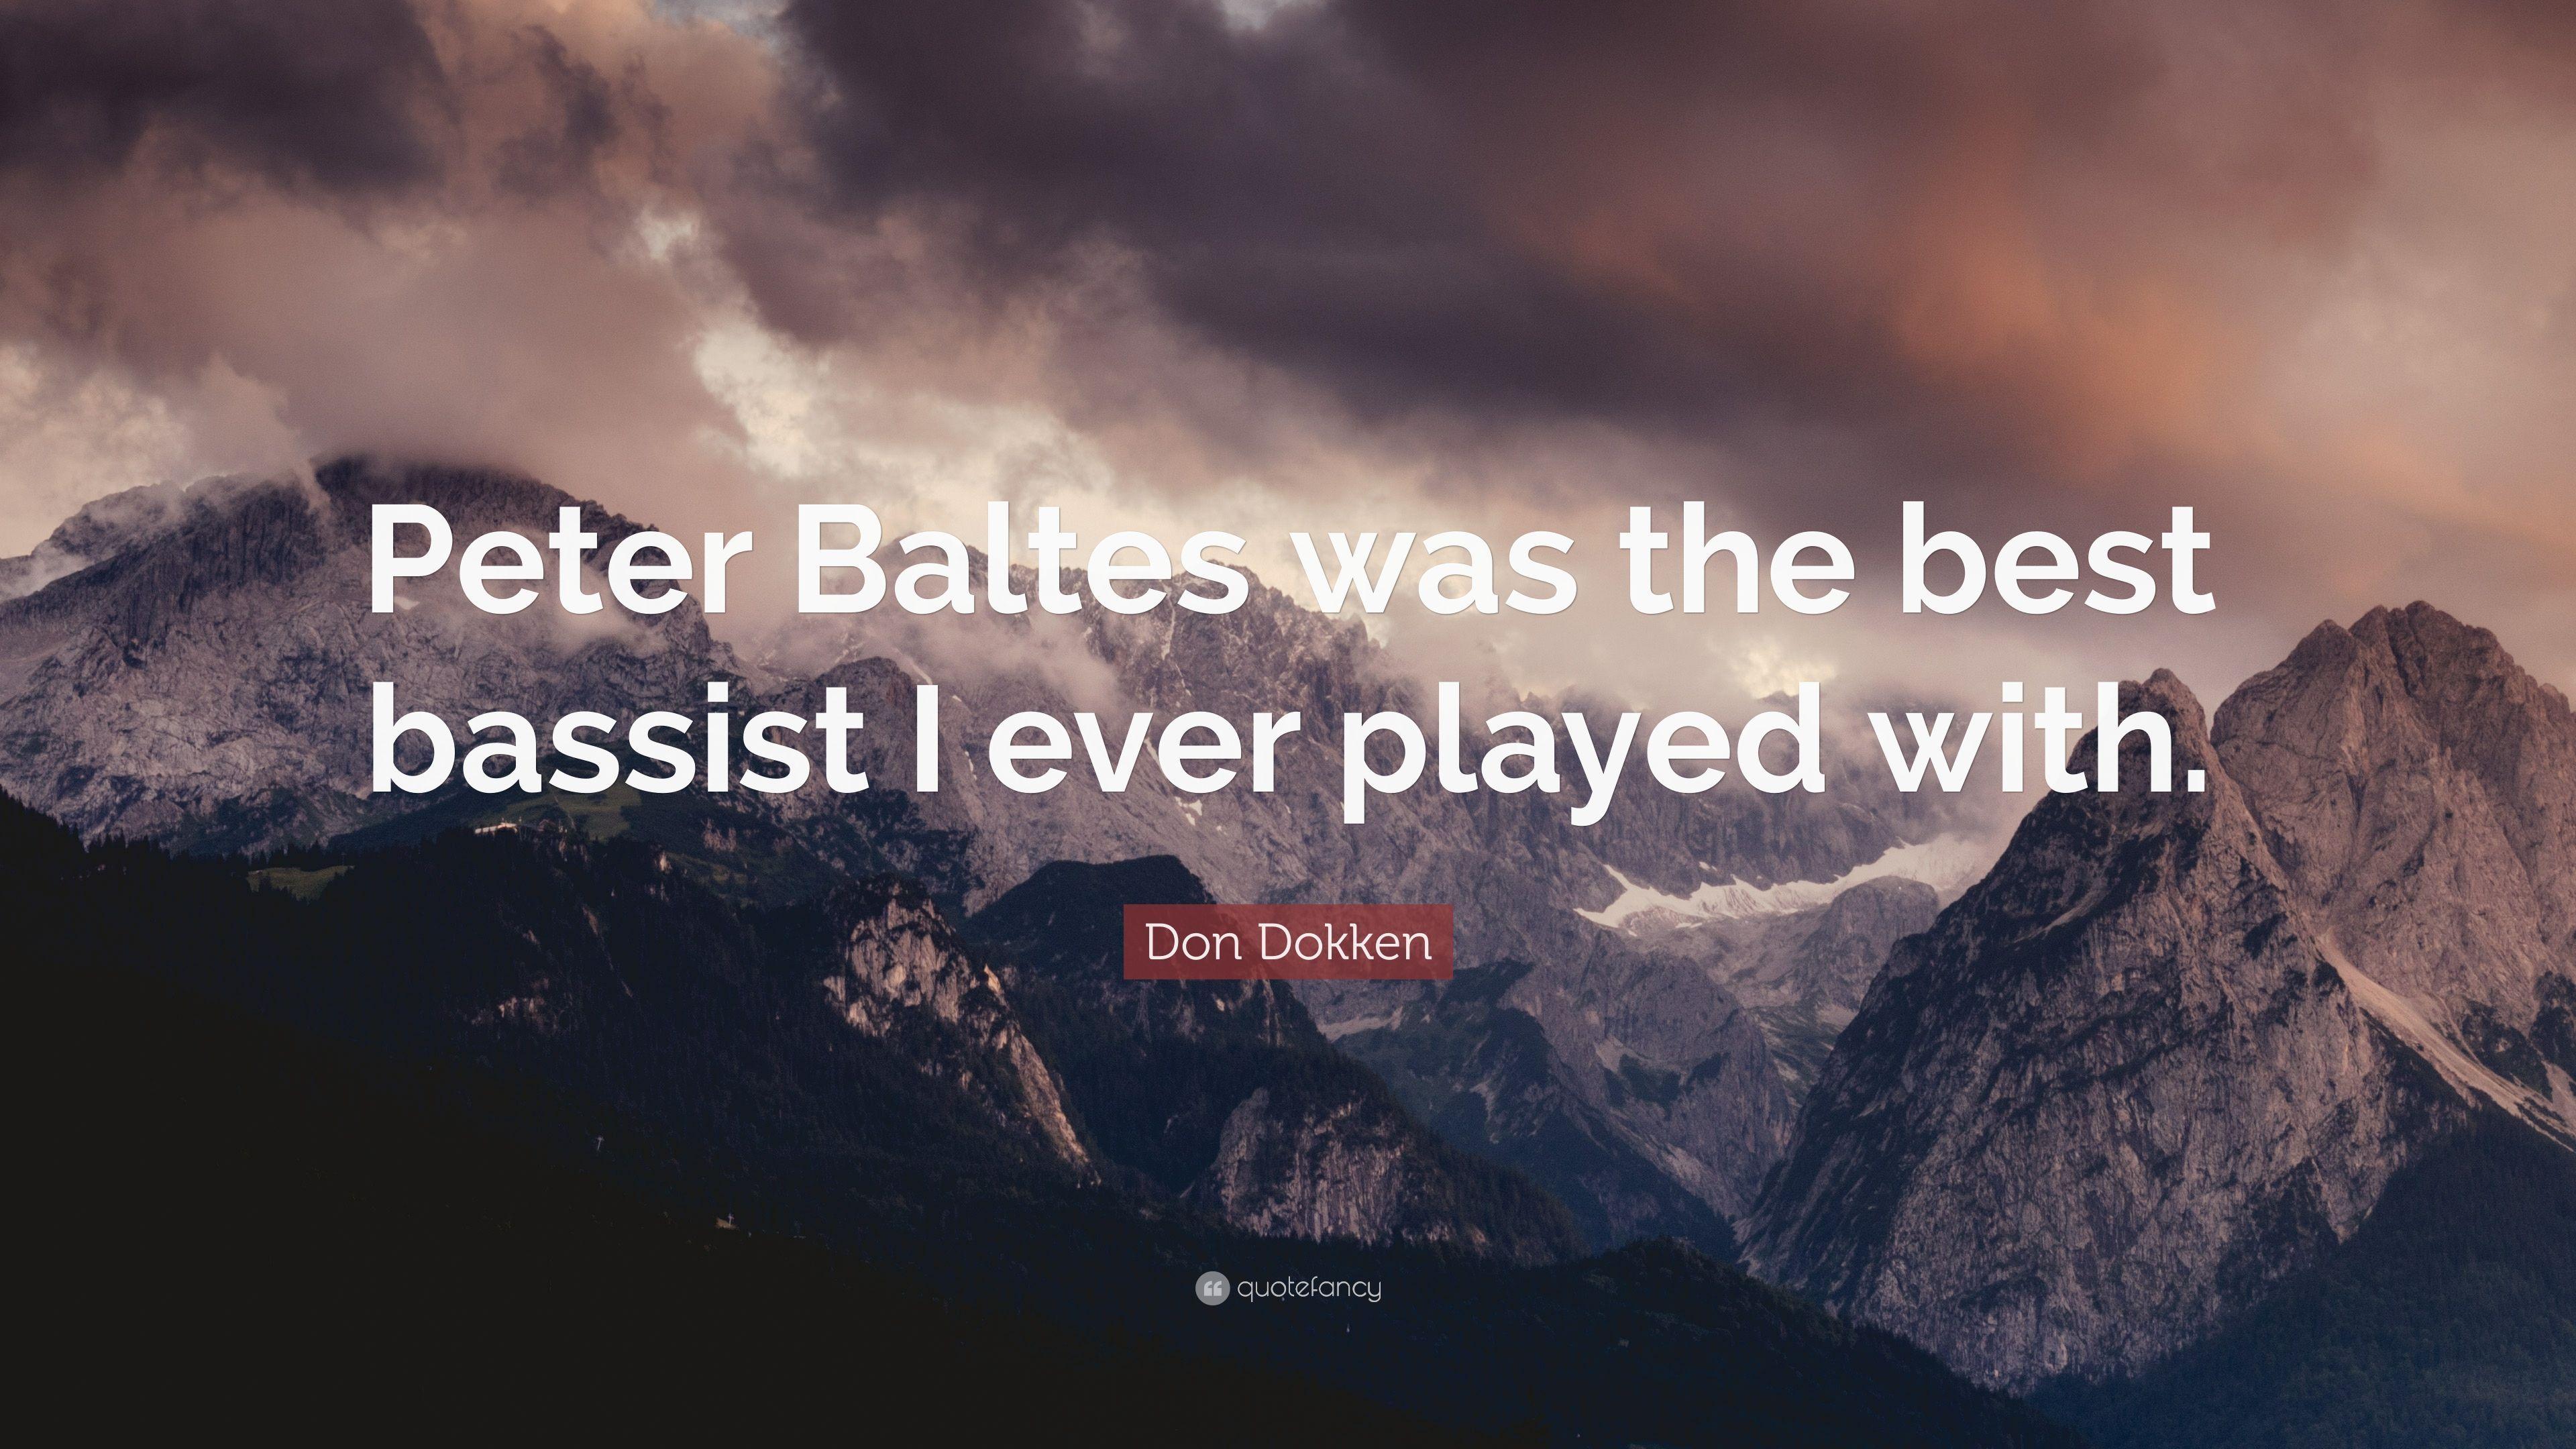 Don Dokken Quote: “Peter Baltes was the best bassist I ever played